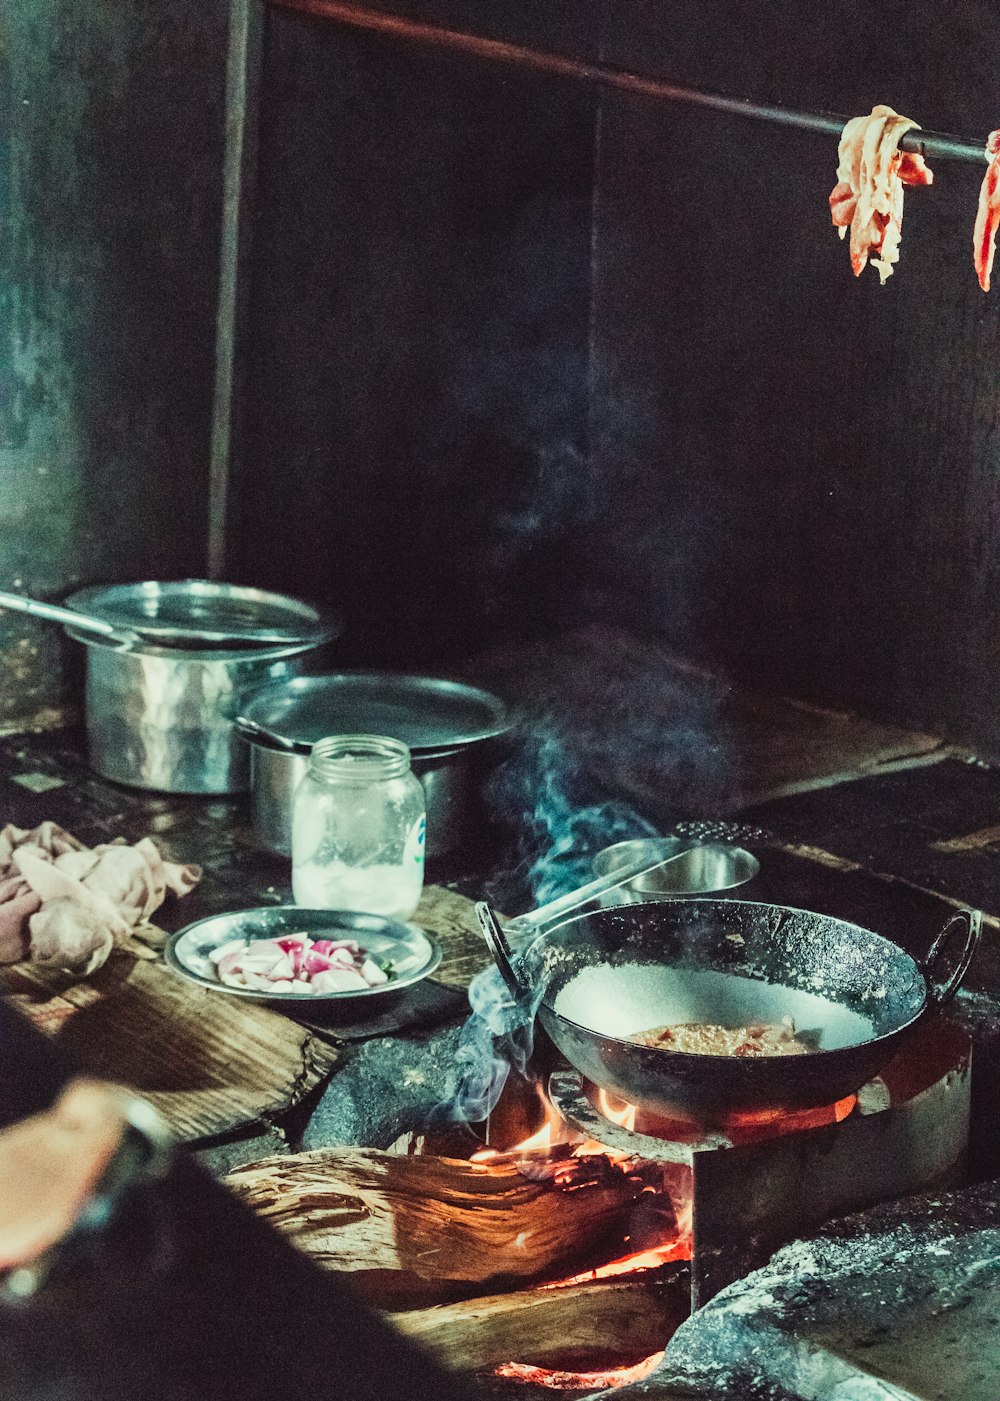 a person cooking food on a stove in a kitchen